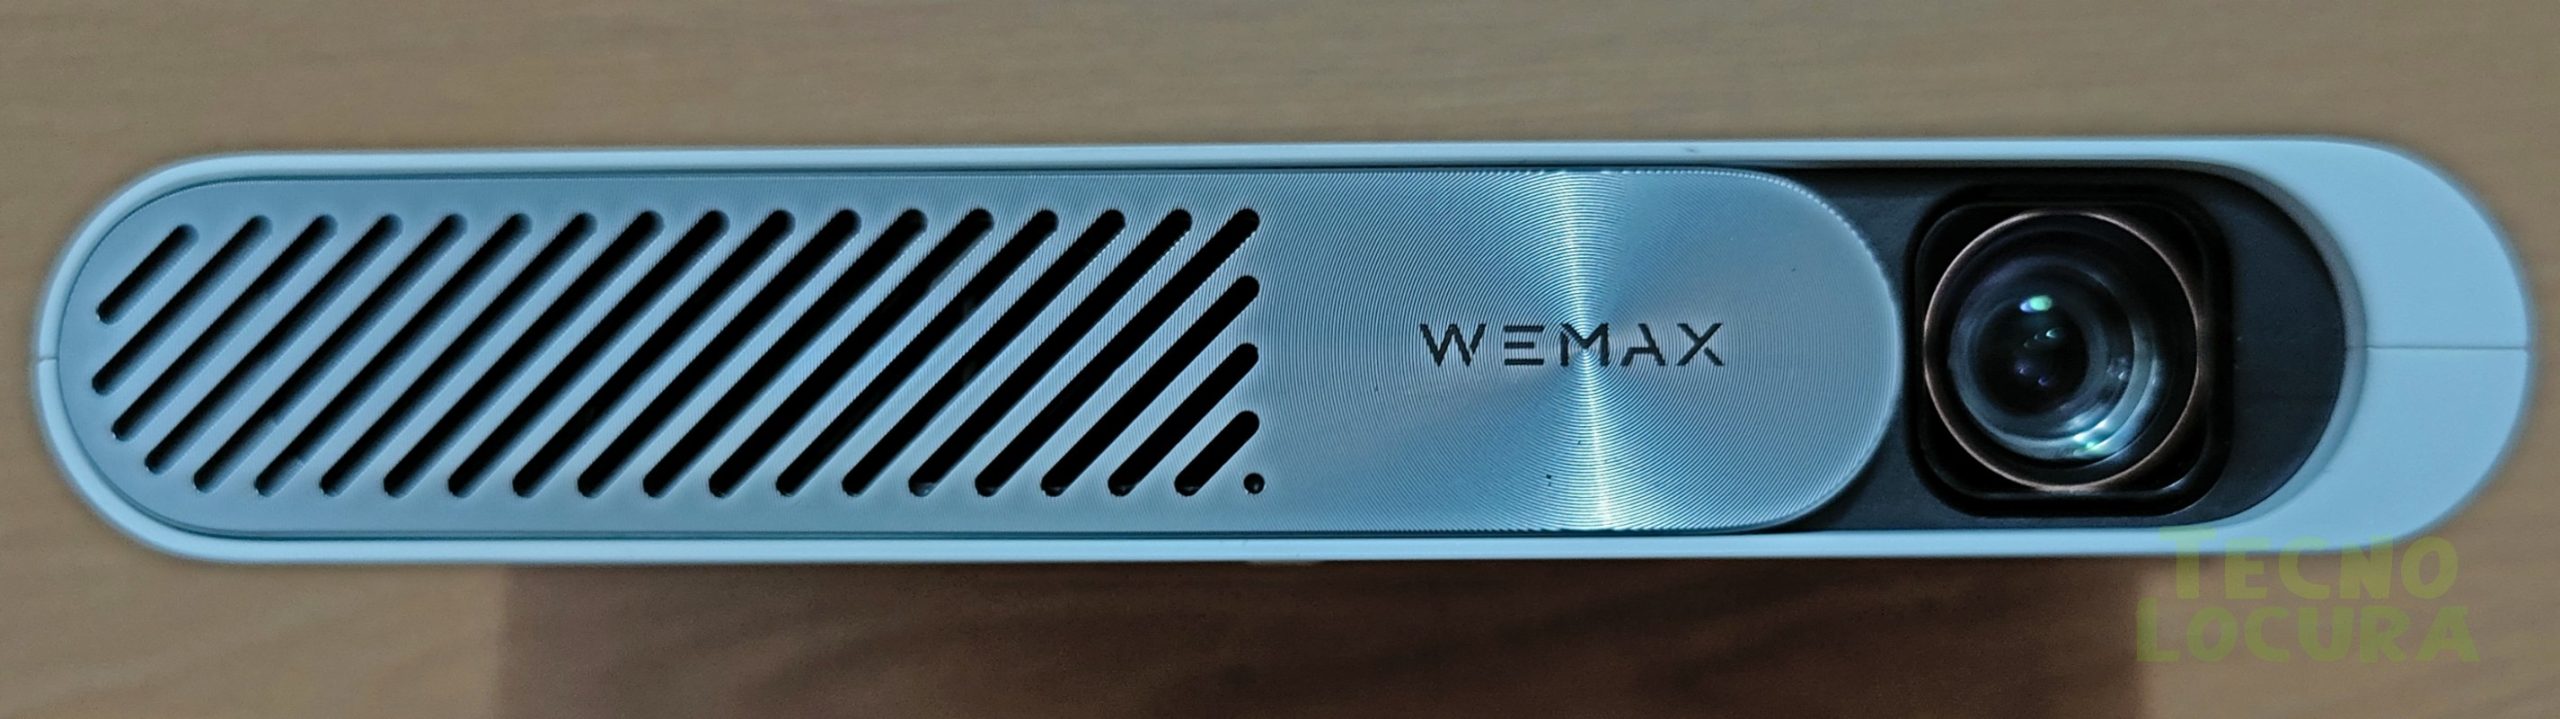 Wemax GO review